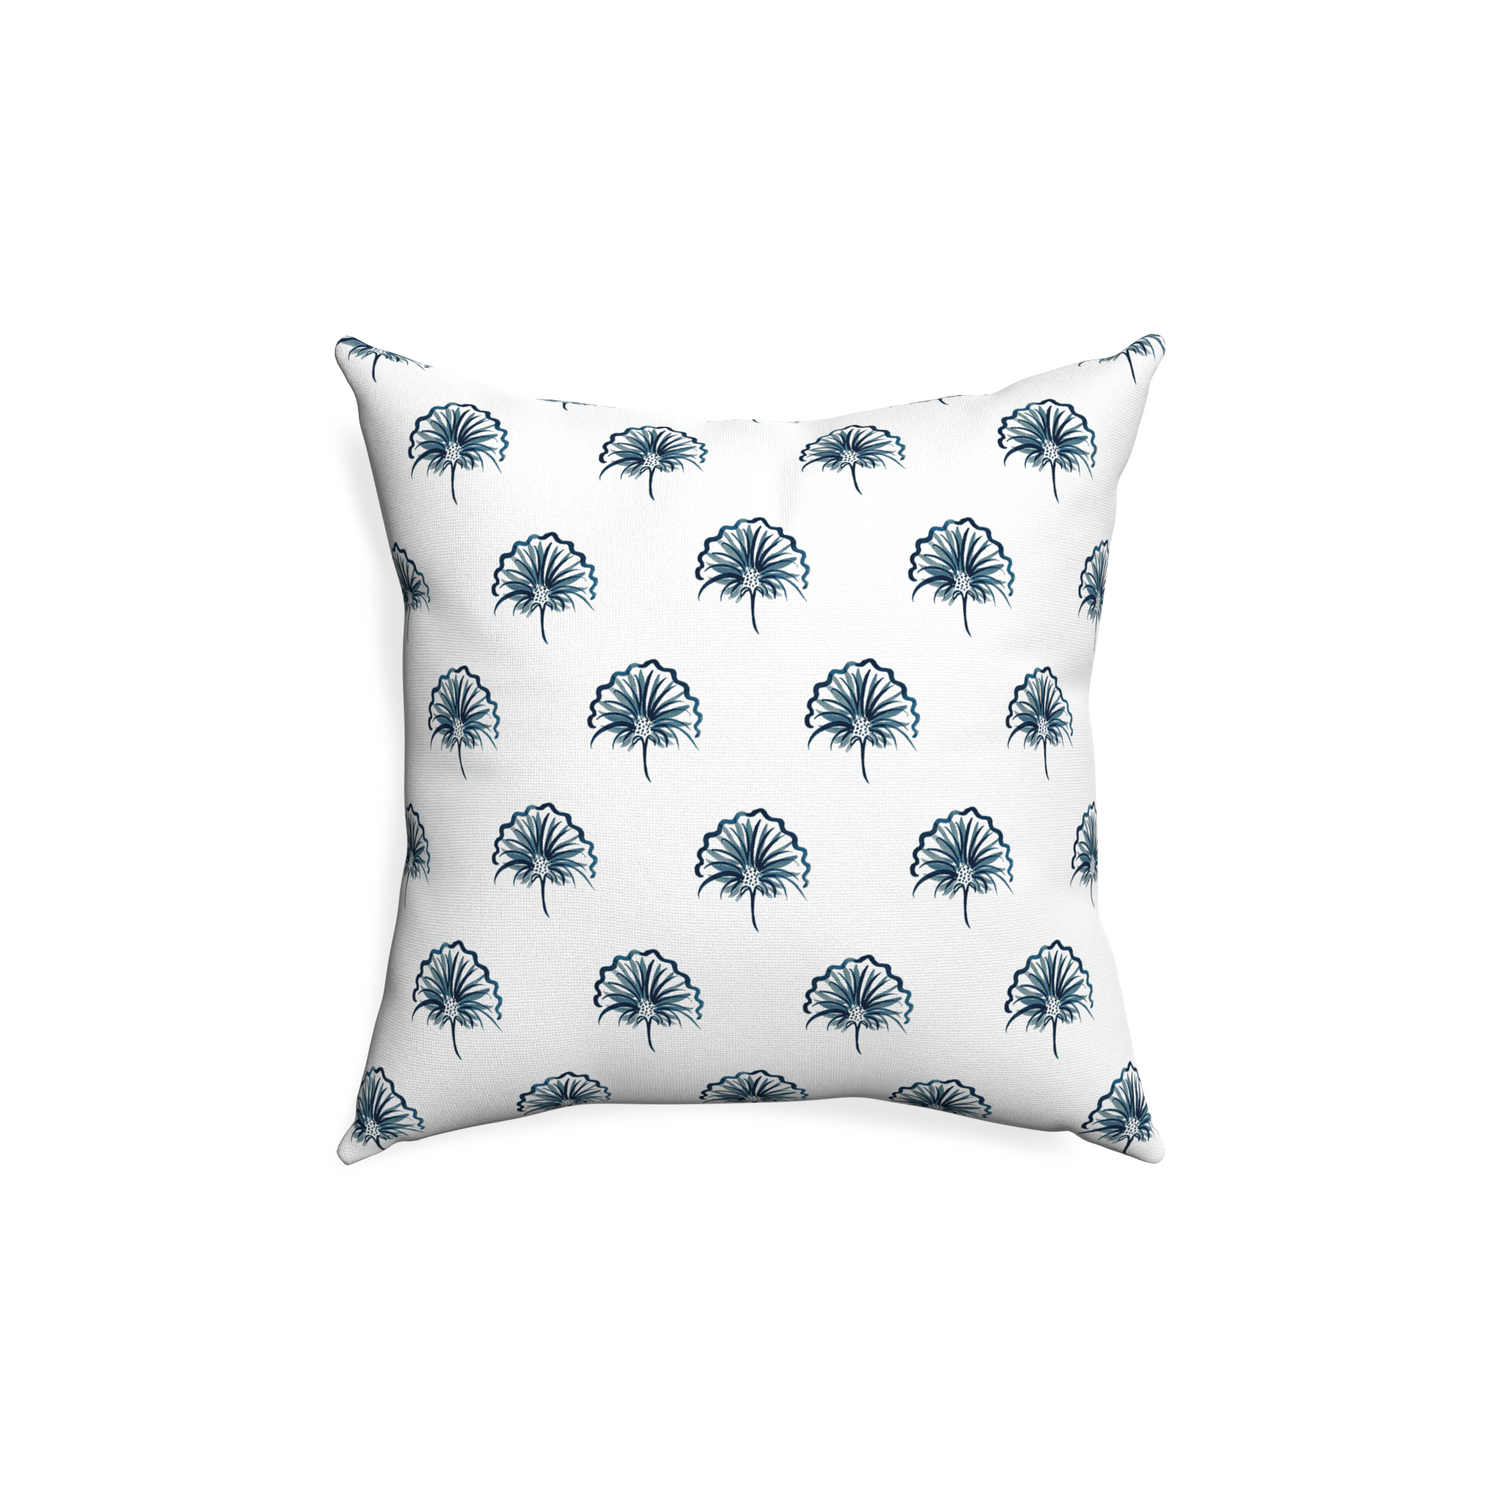 18-square penelope midnight custom pillow with none on white background